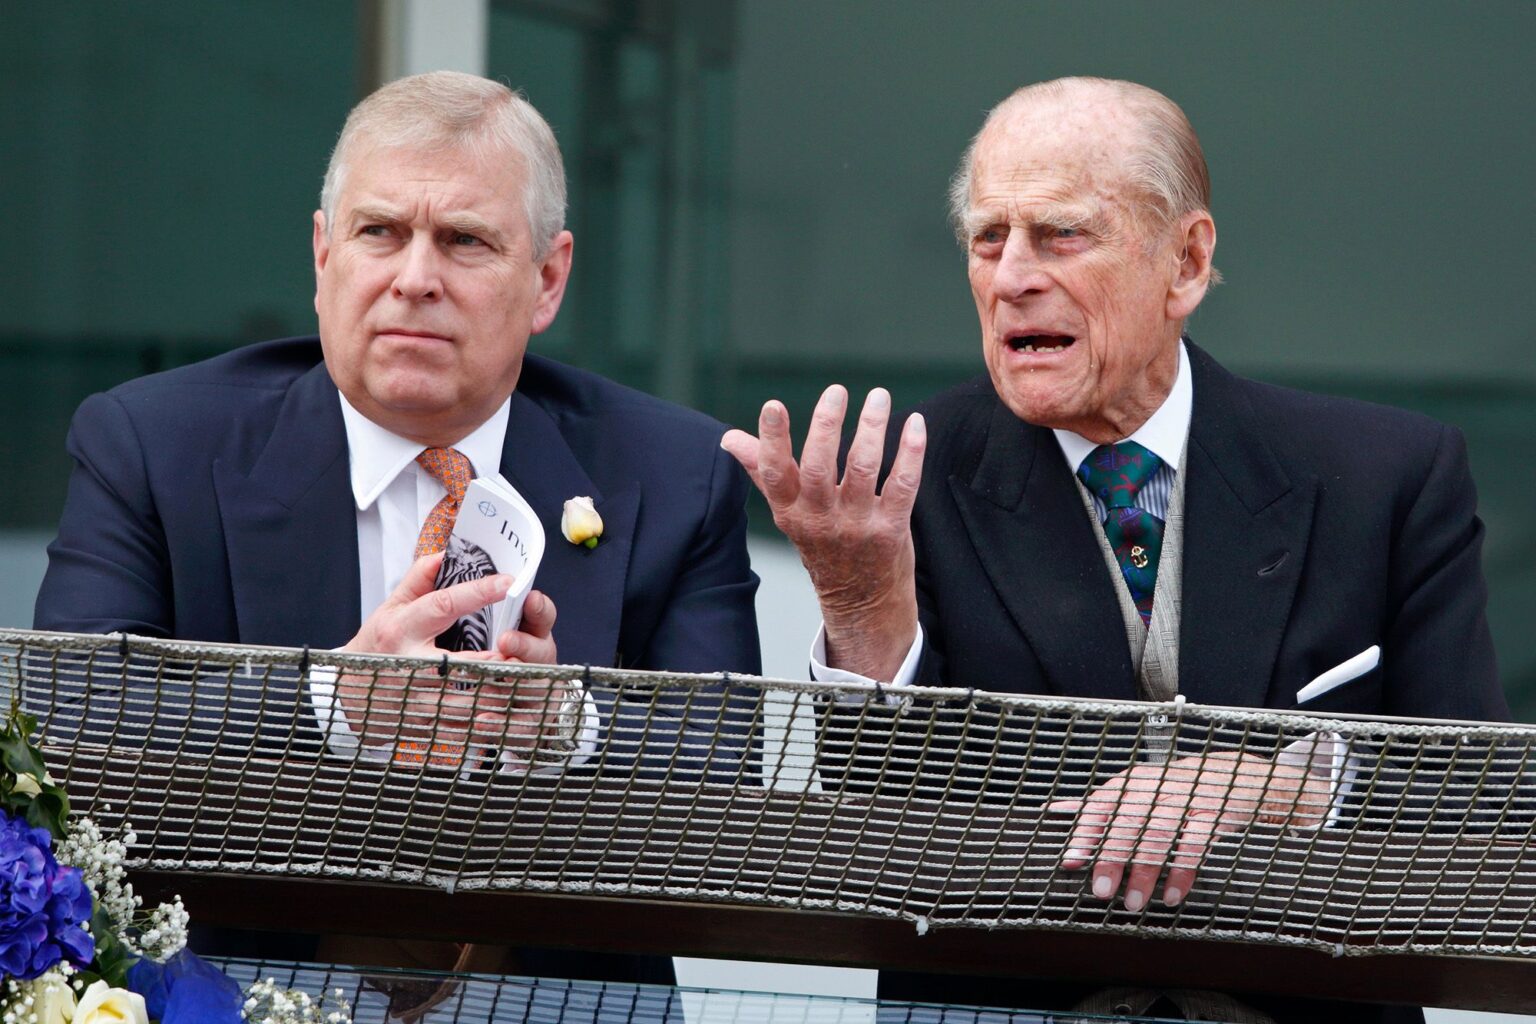 Prince Philip, Duke of Edinburgh, has his hands full thanks to his son Prince Andrew and his ties to Epstein. Is Philip going to disown Andrew?